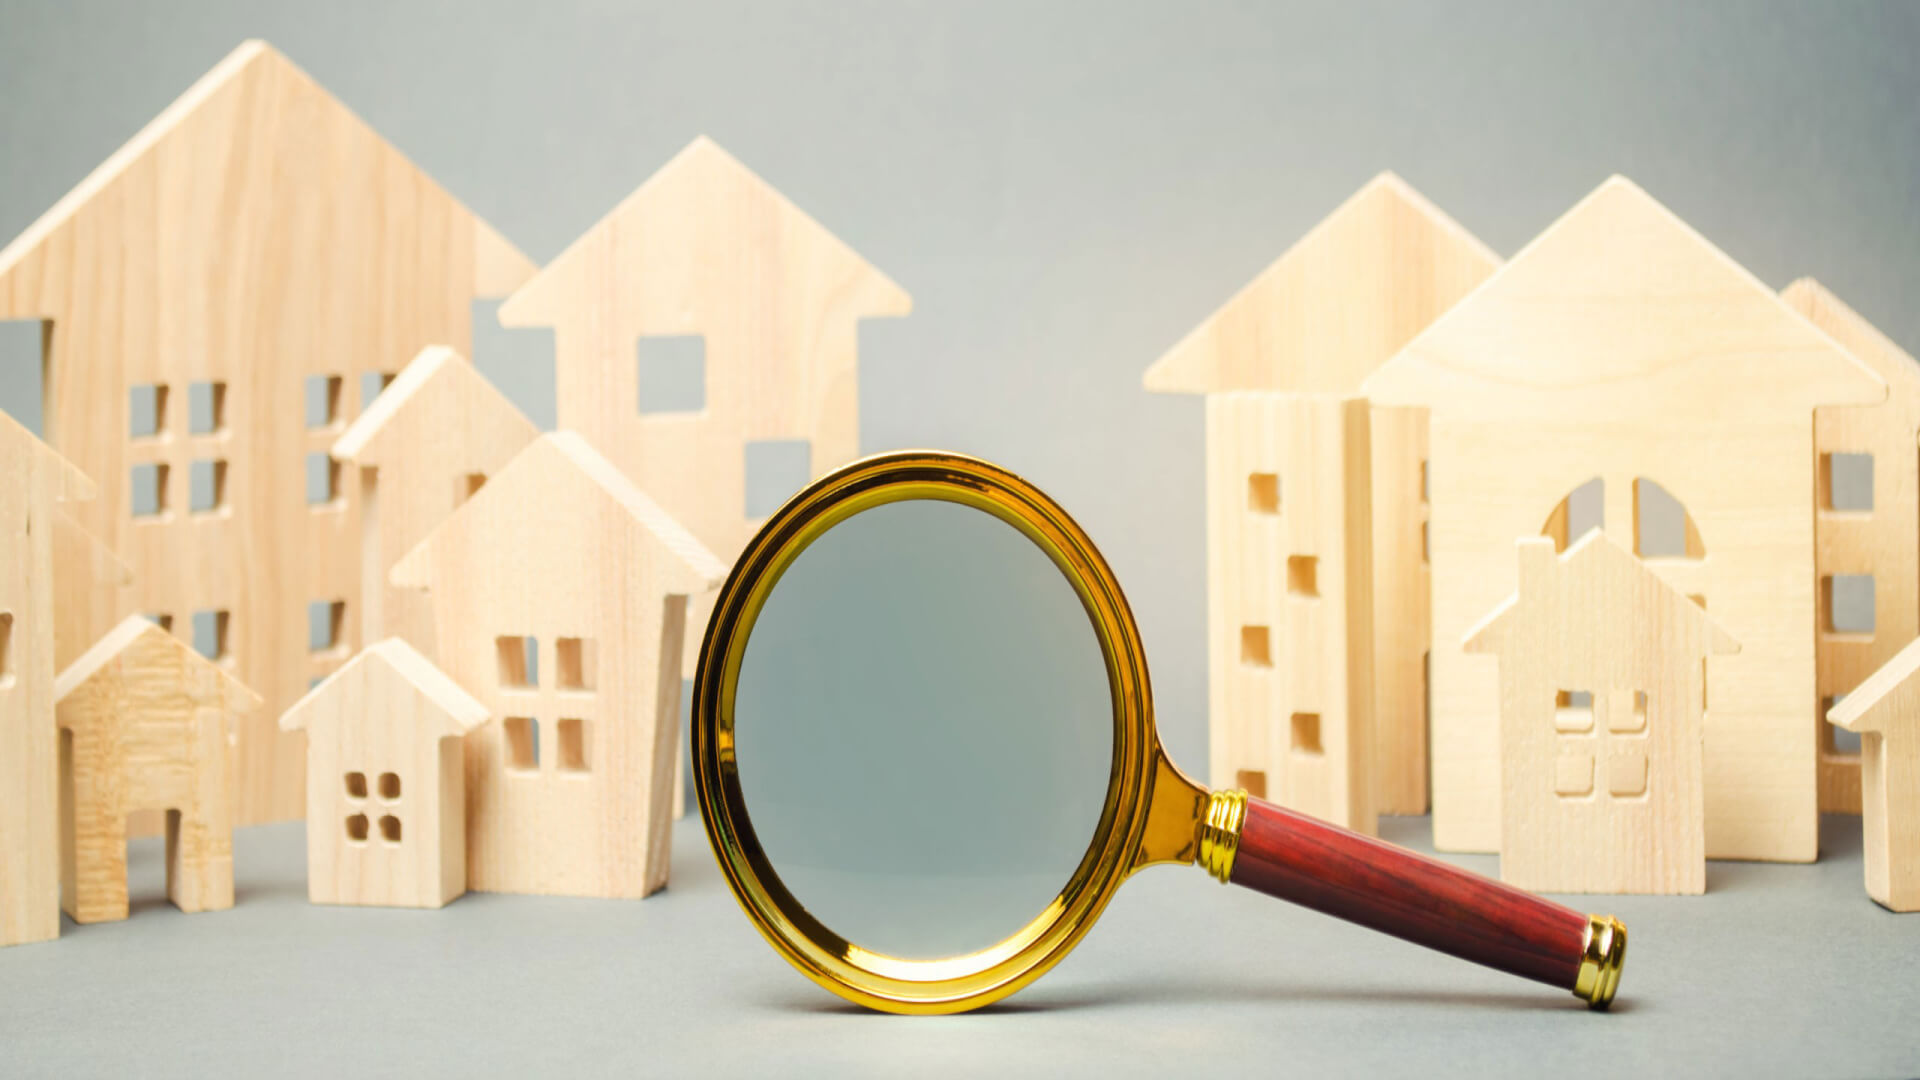 Magnifying glass in front of wooden cut outs of homes